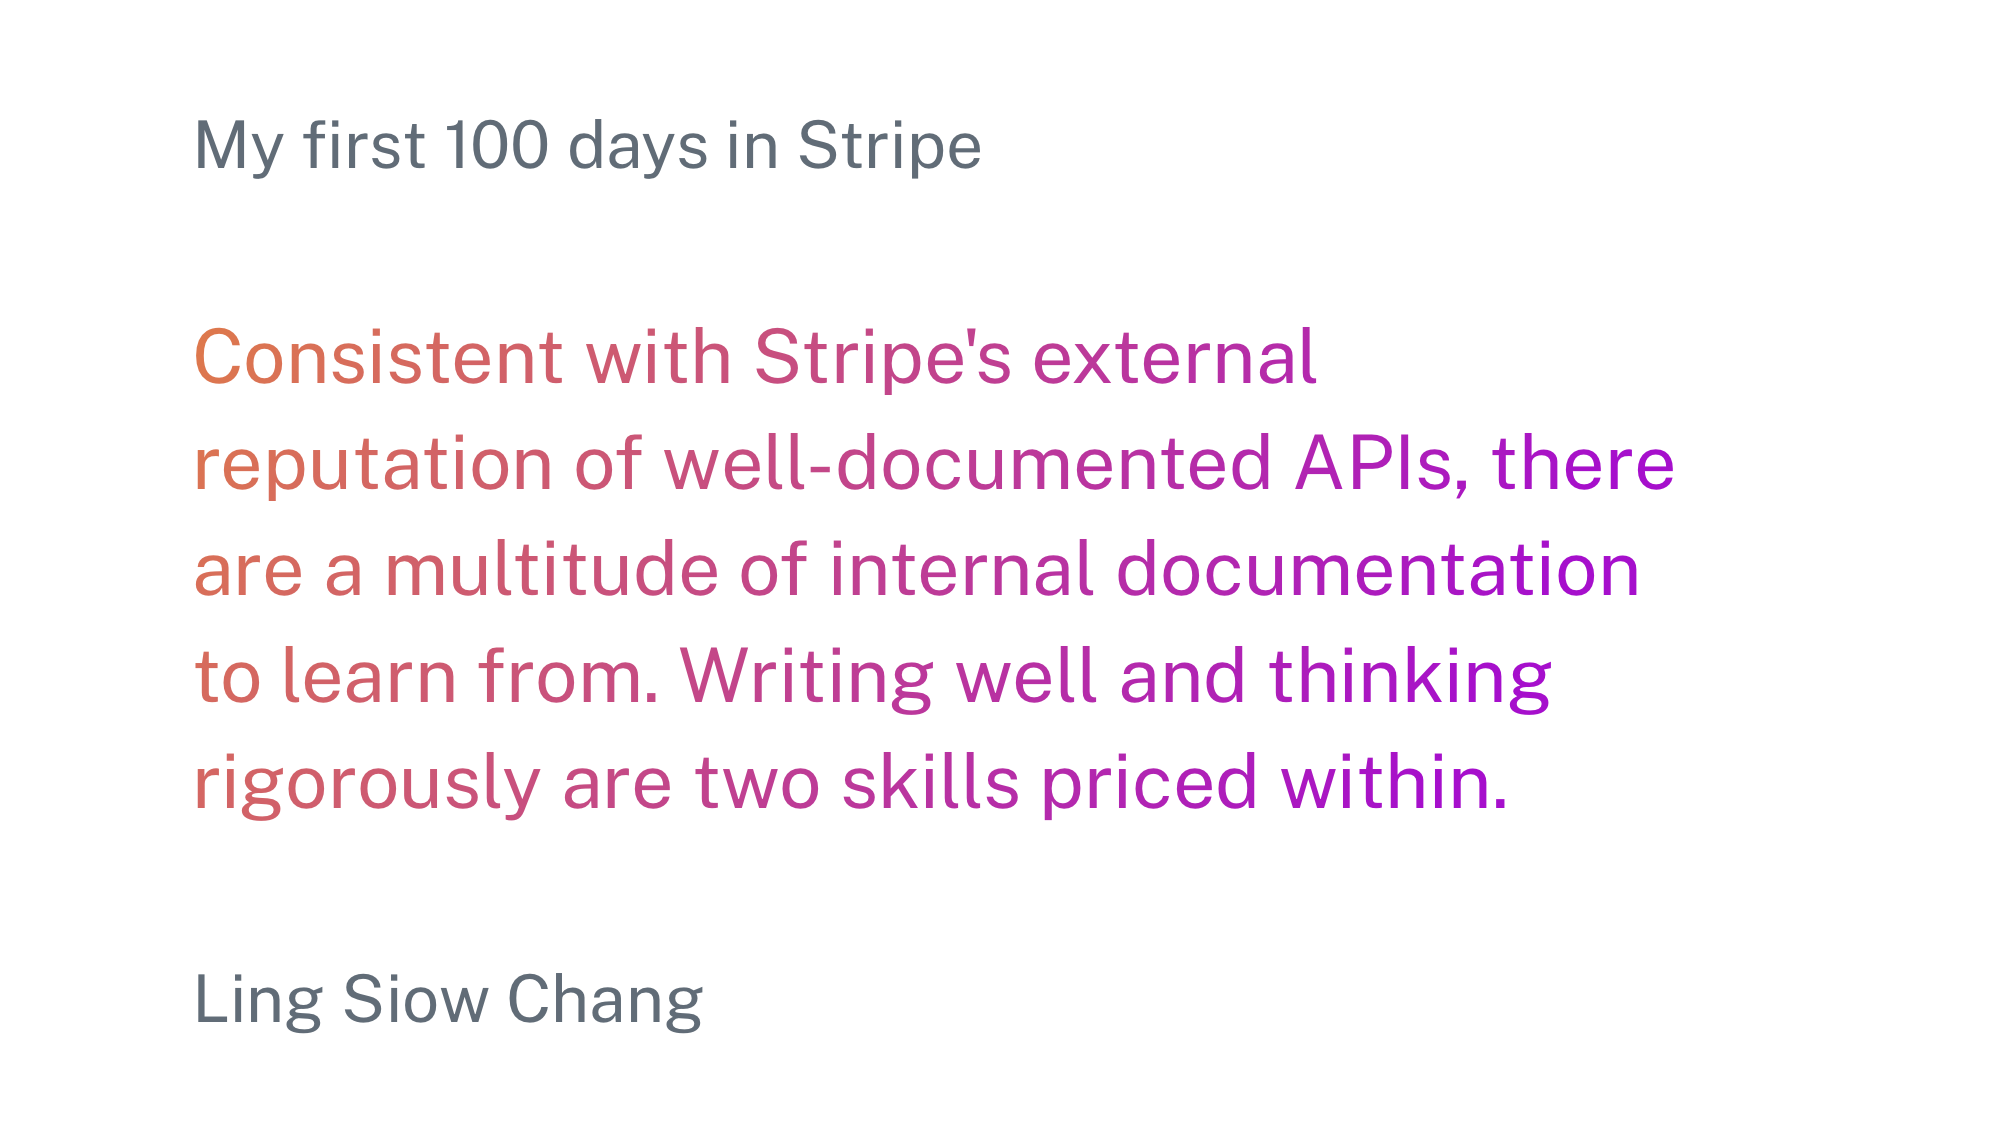 A quote from Ling Siow Chang that says "Consistent with Stripe's external reputation of well-documented APIs, there are a multitude of internal documentation to learn from. Writing well and thinking rigorously are two skills priced within."